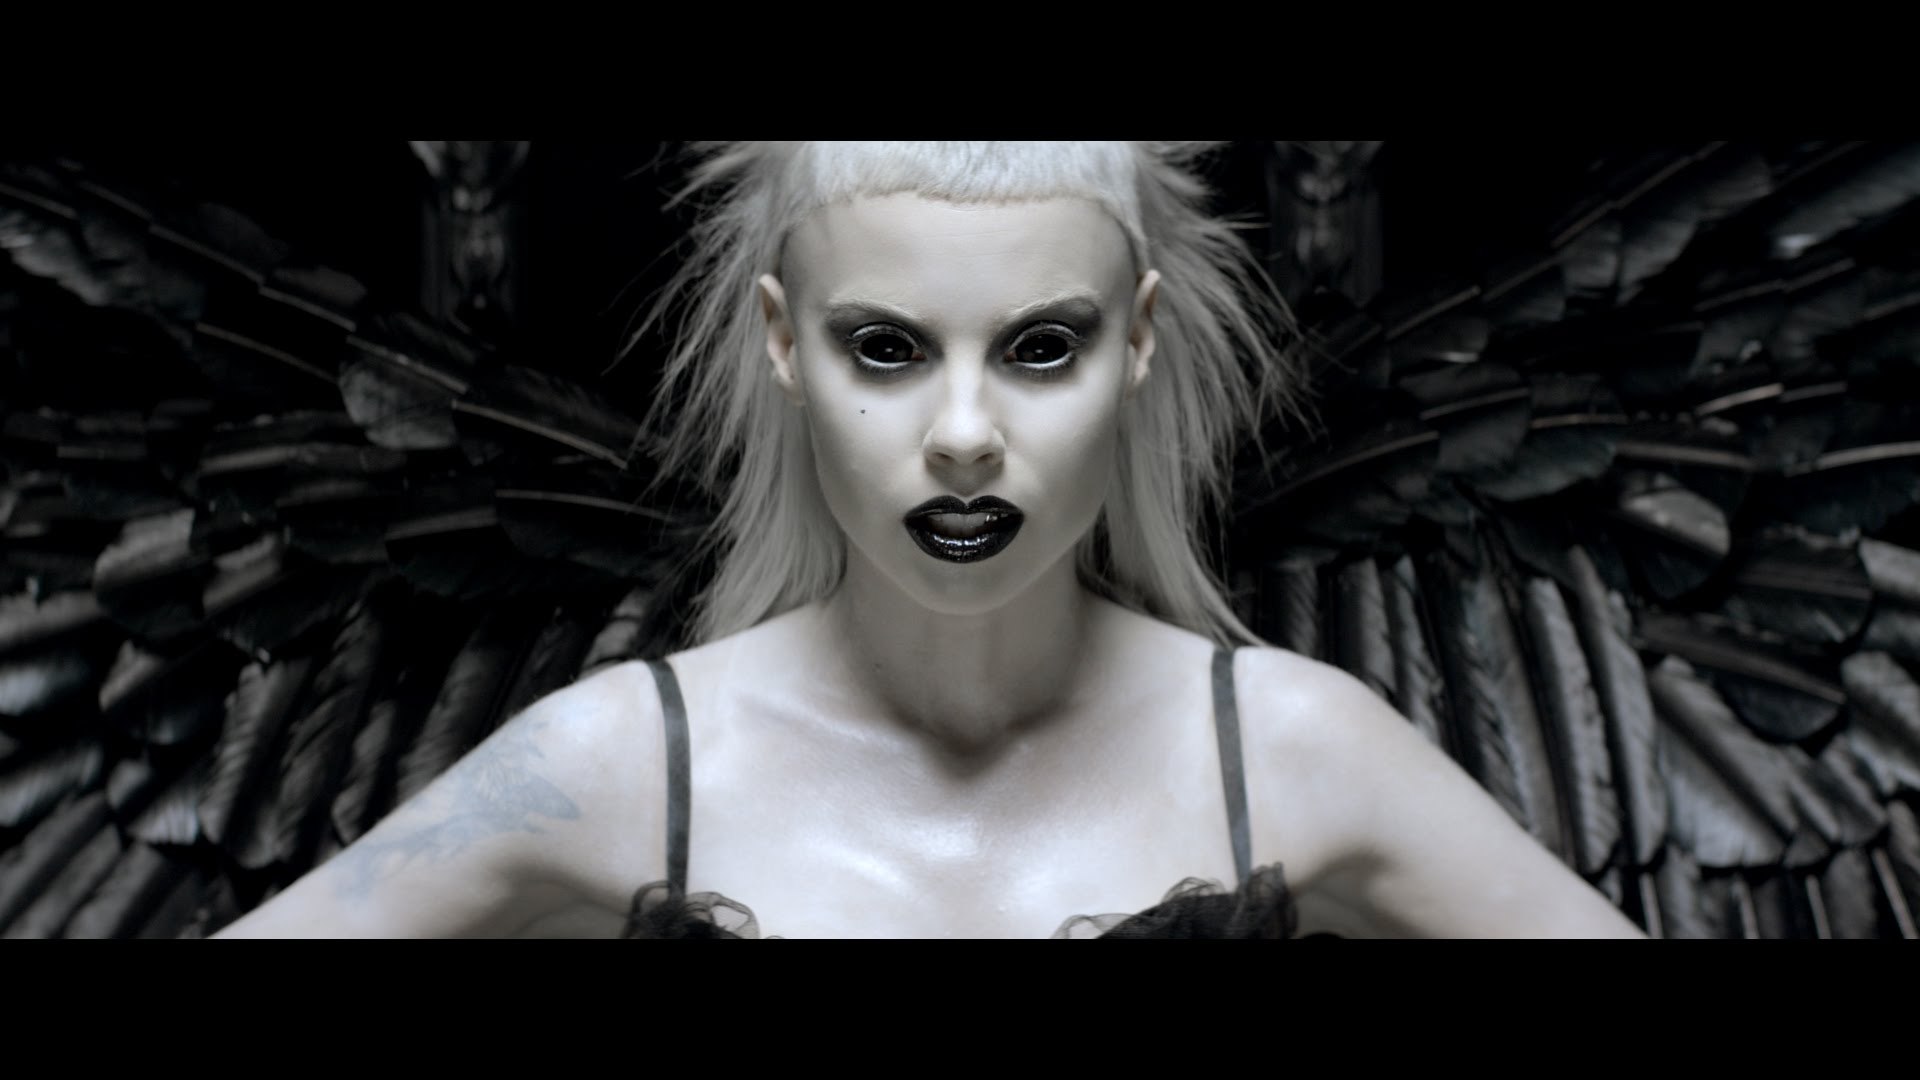 Die Antwoord - Ugly Boy (Official Video) - Video Dailymotion